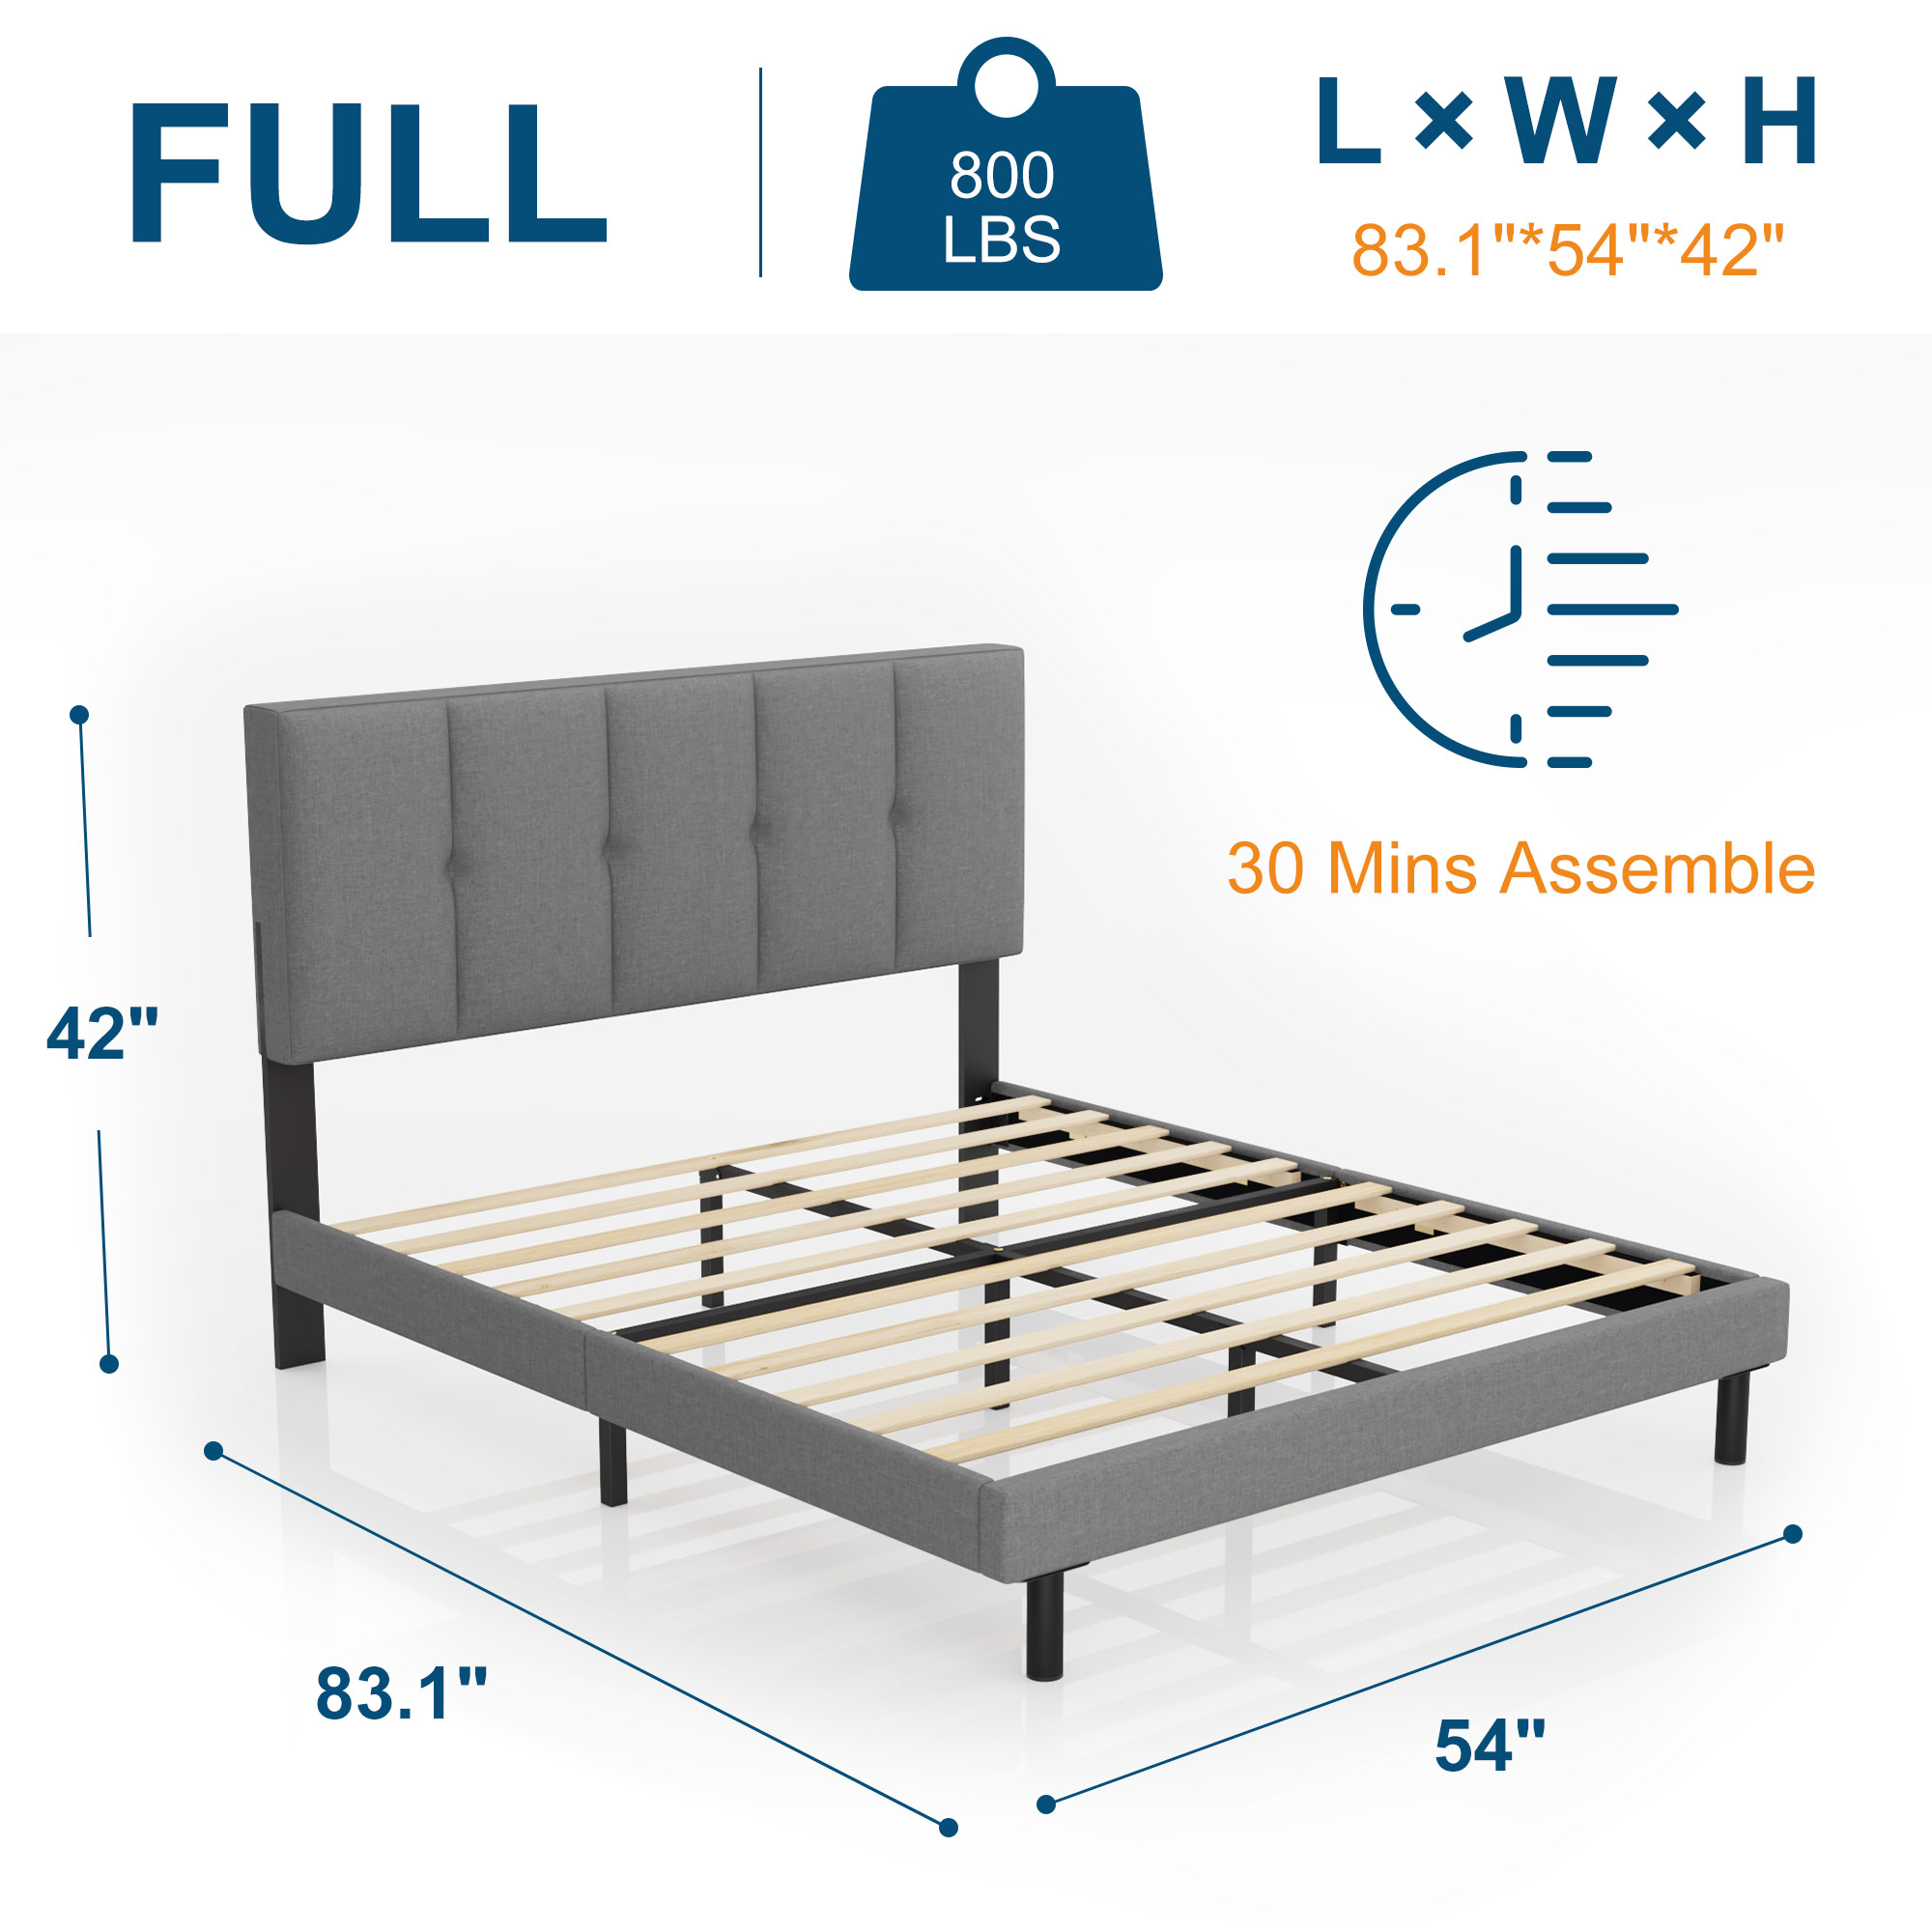 Full Bed Frame, HAIIDE Full Size Bed Frame with Upholstered Headboard and Strong Wooden Slats, Light Grey - image 2 of 7